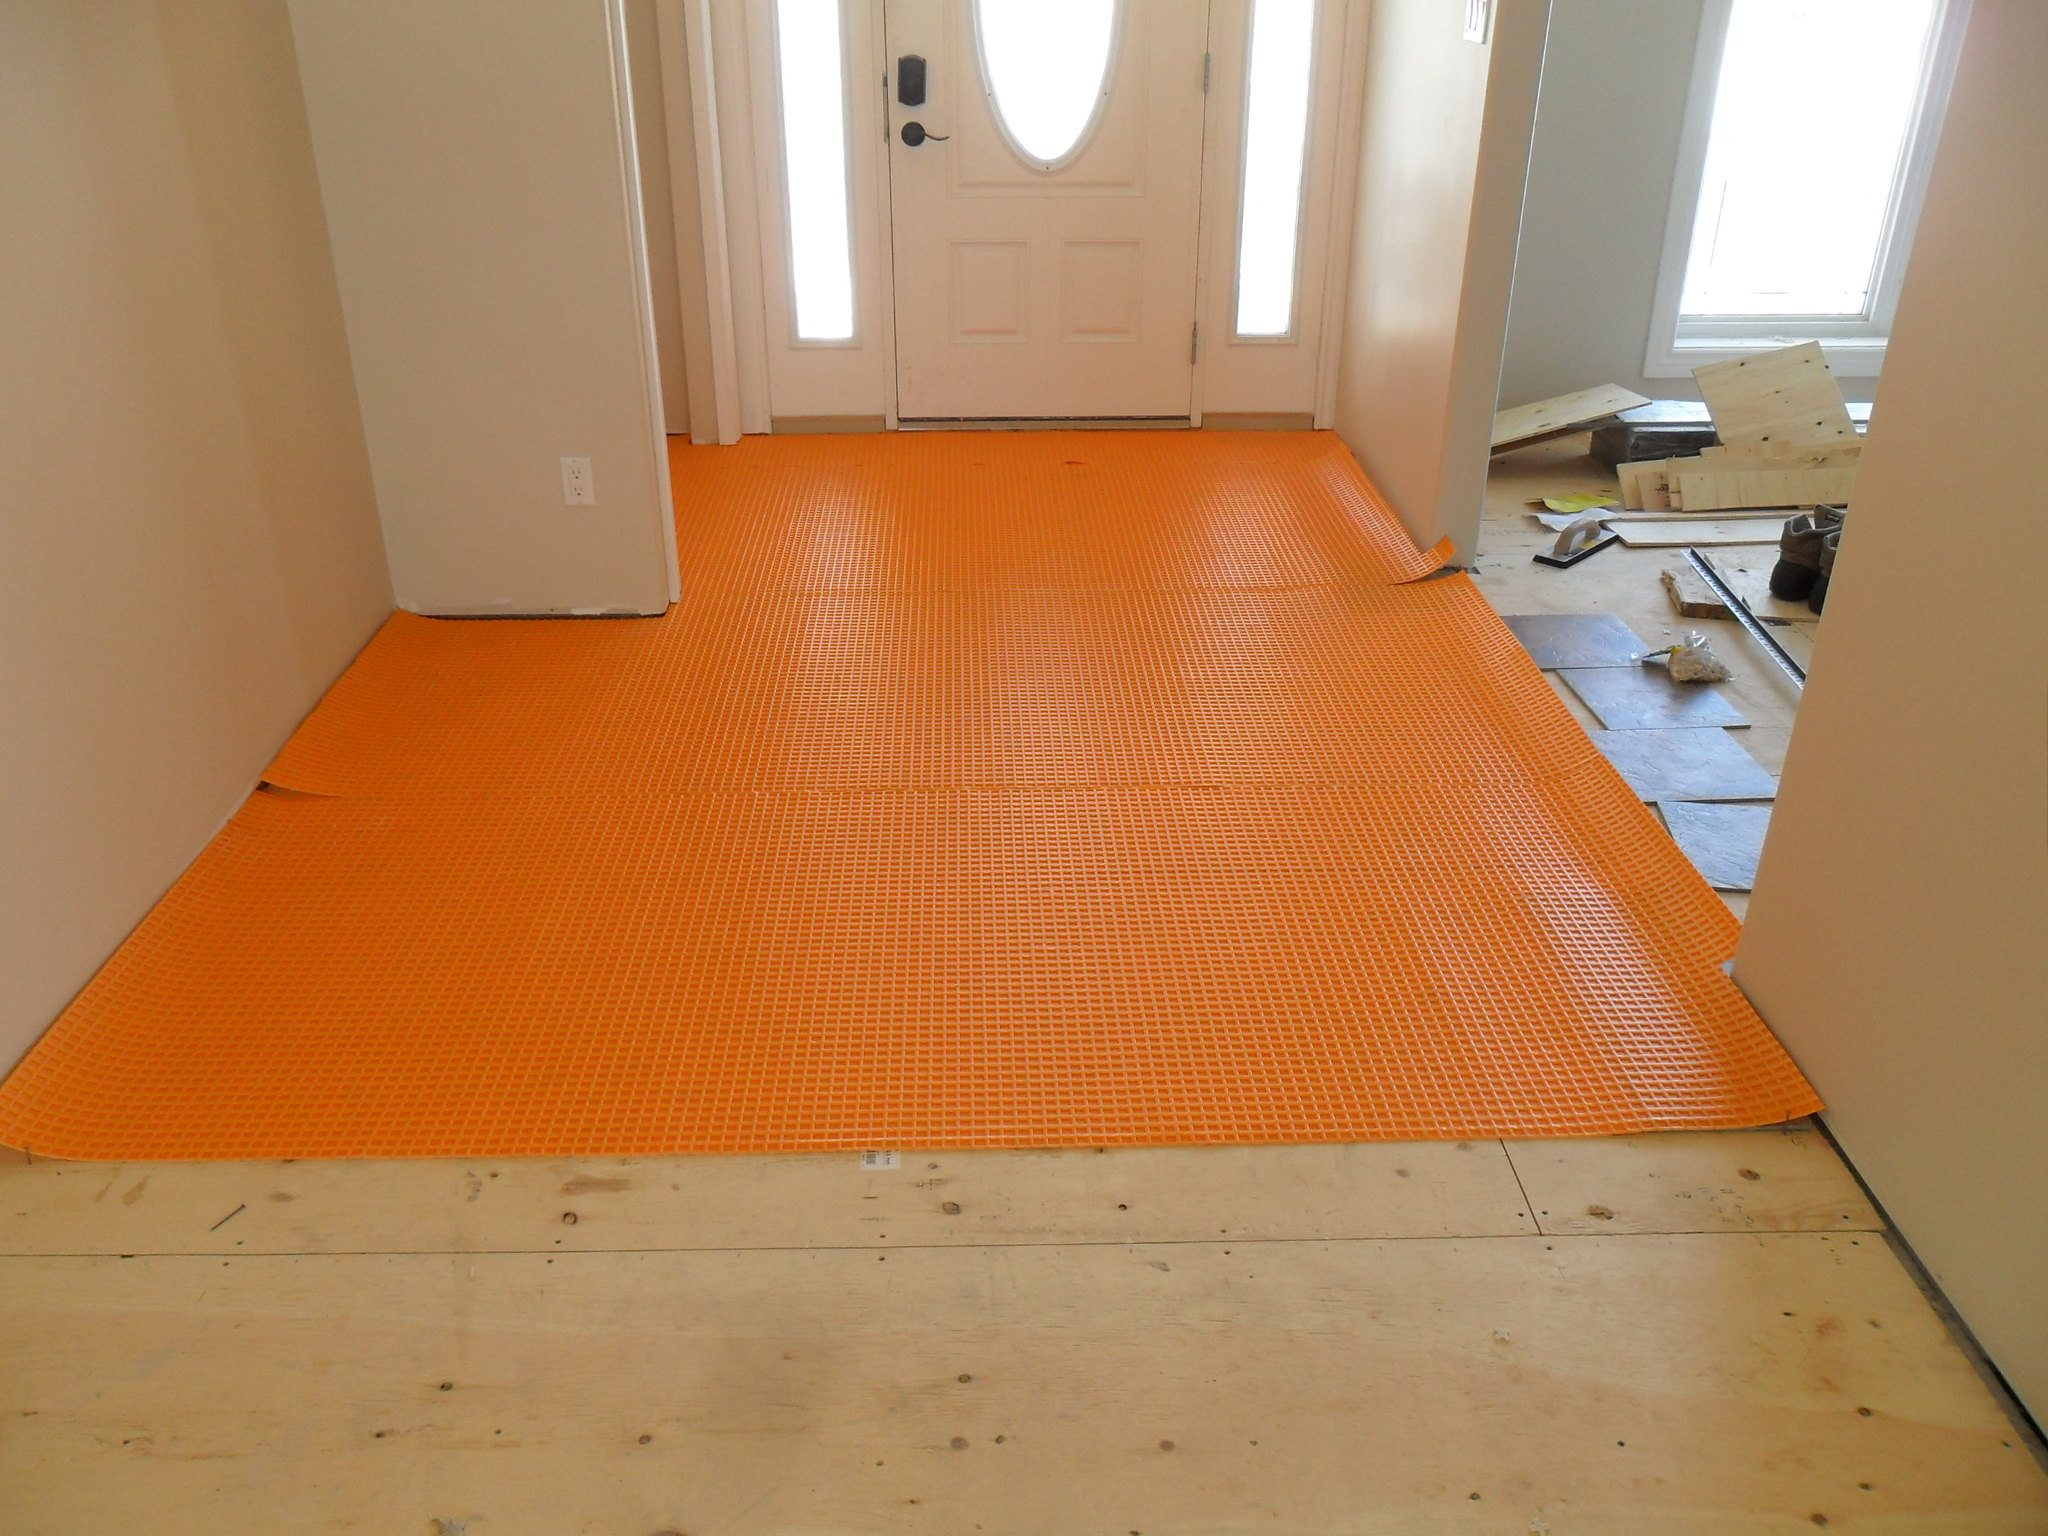 Ditra Over Plywood Theplywood Com, How To Tile A Bathroom Floor Over Plywood